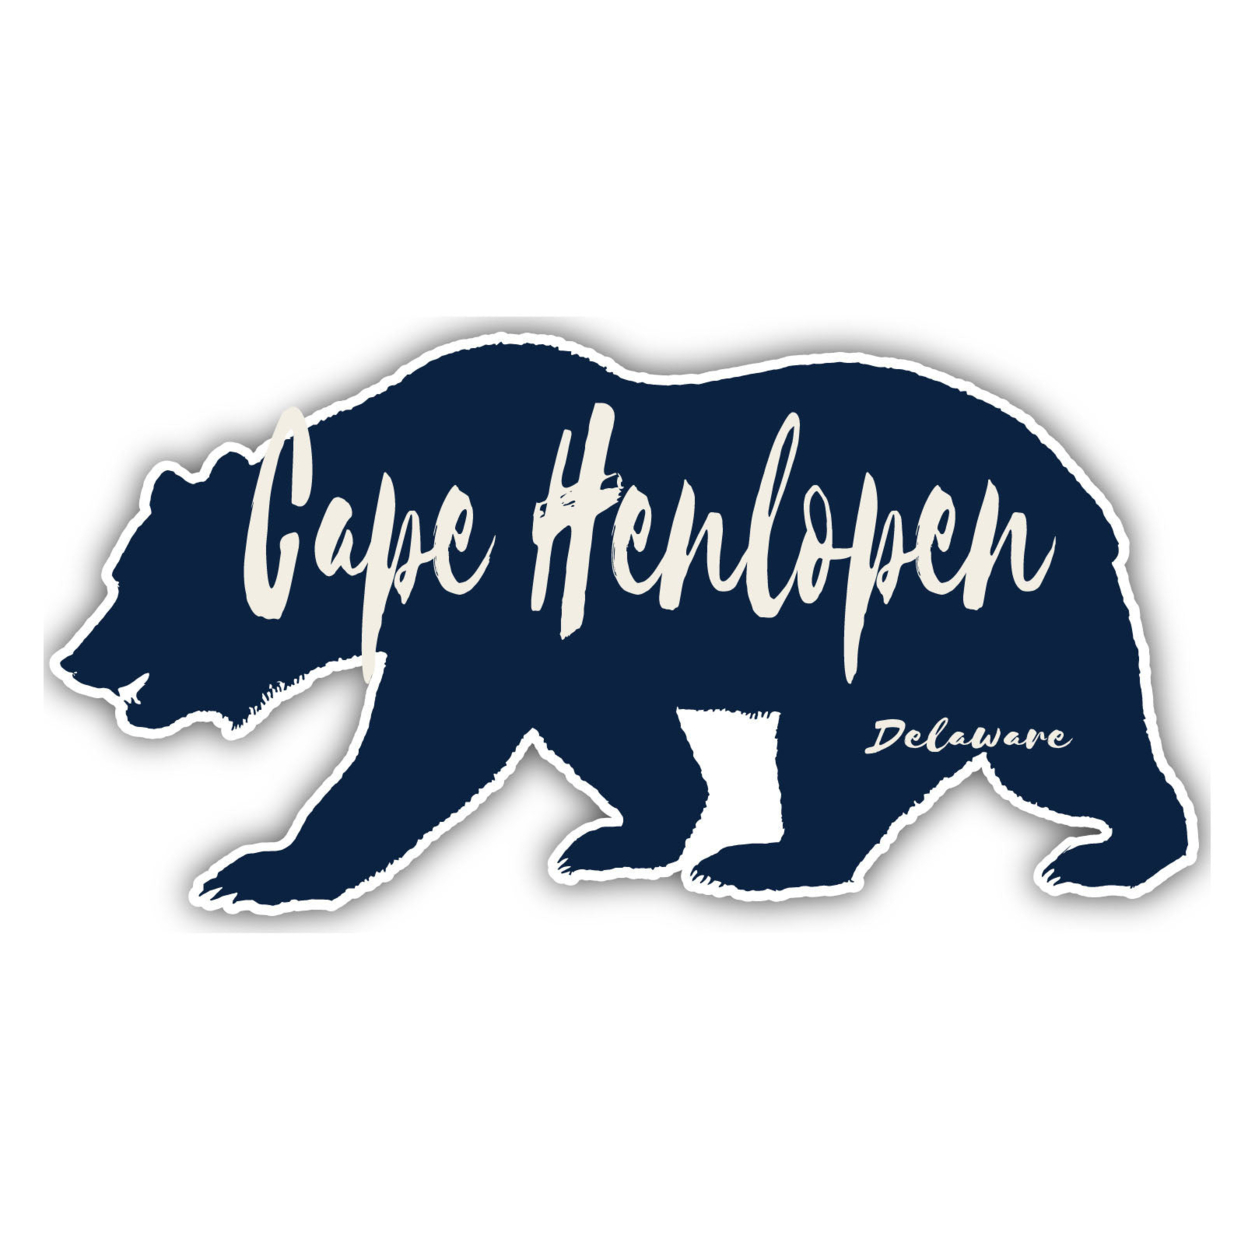 Cape Henlopen Delaware Souvenir Decorative Stickers (Choose Theme And Size) - 4-Pack, 12-Inch, Camp Life